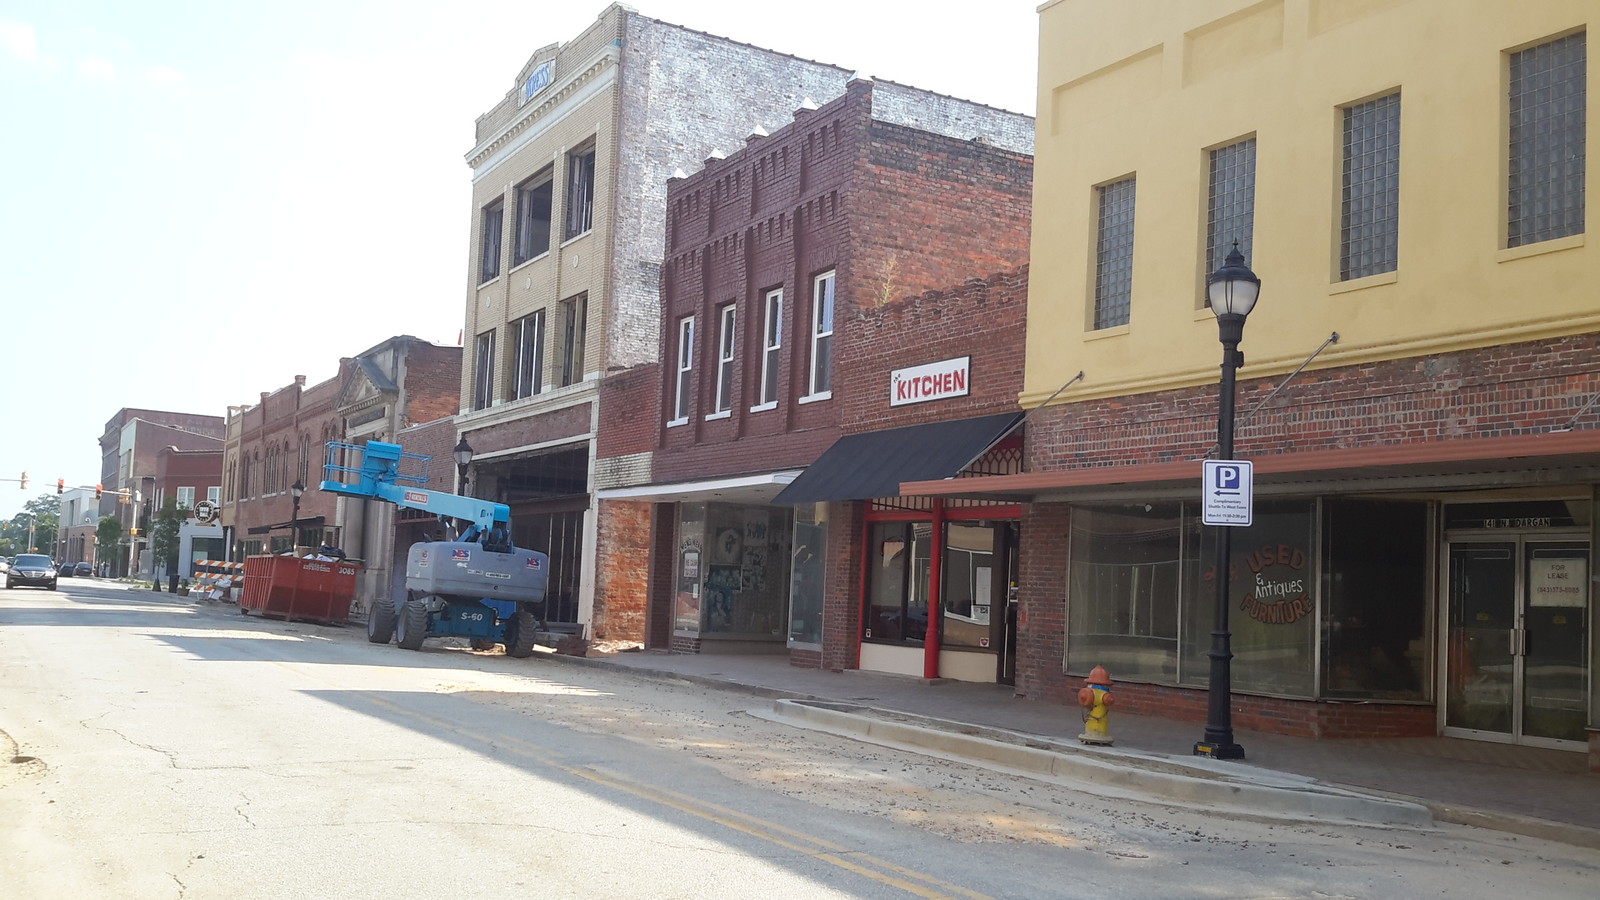 downtown florence sc is booming (Sumter: elementary school ...